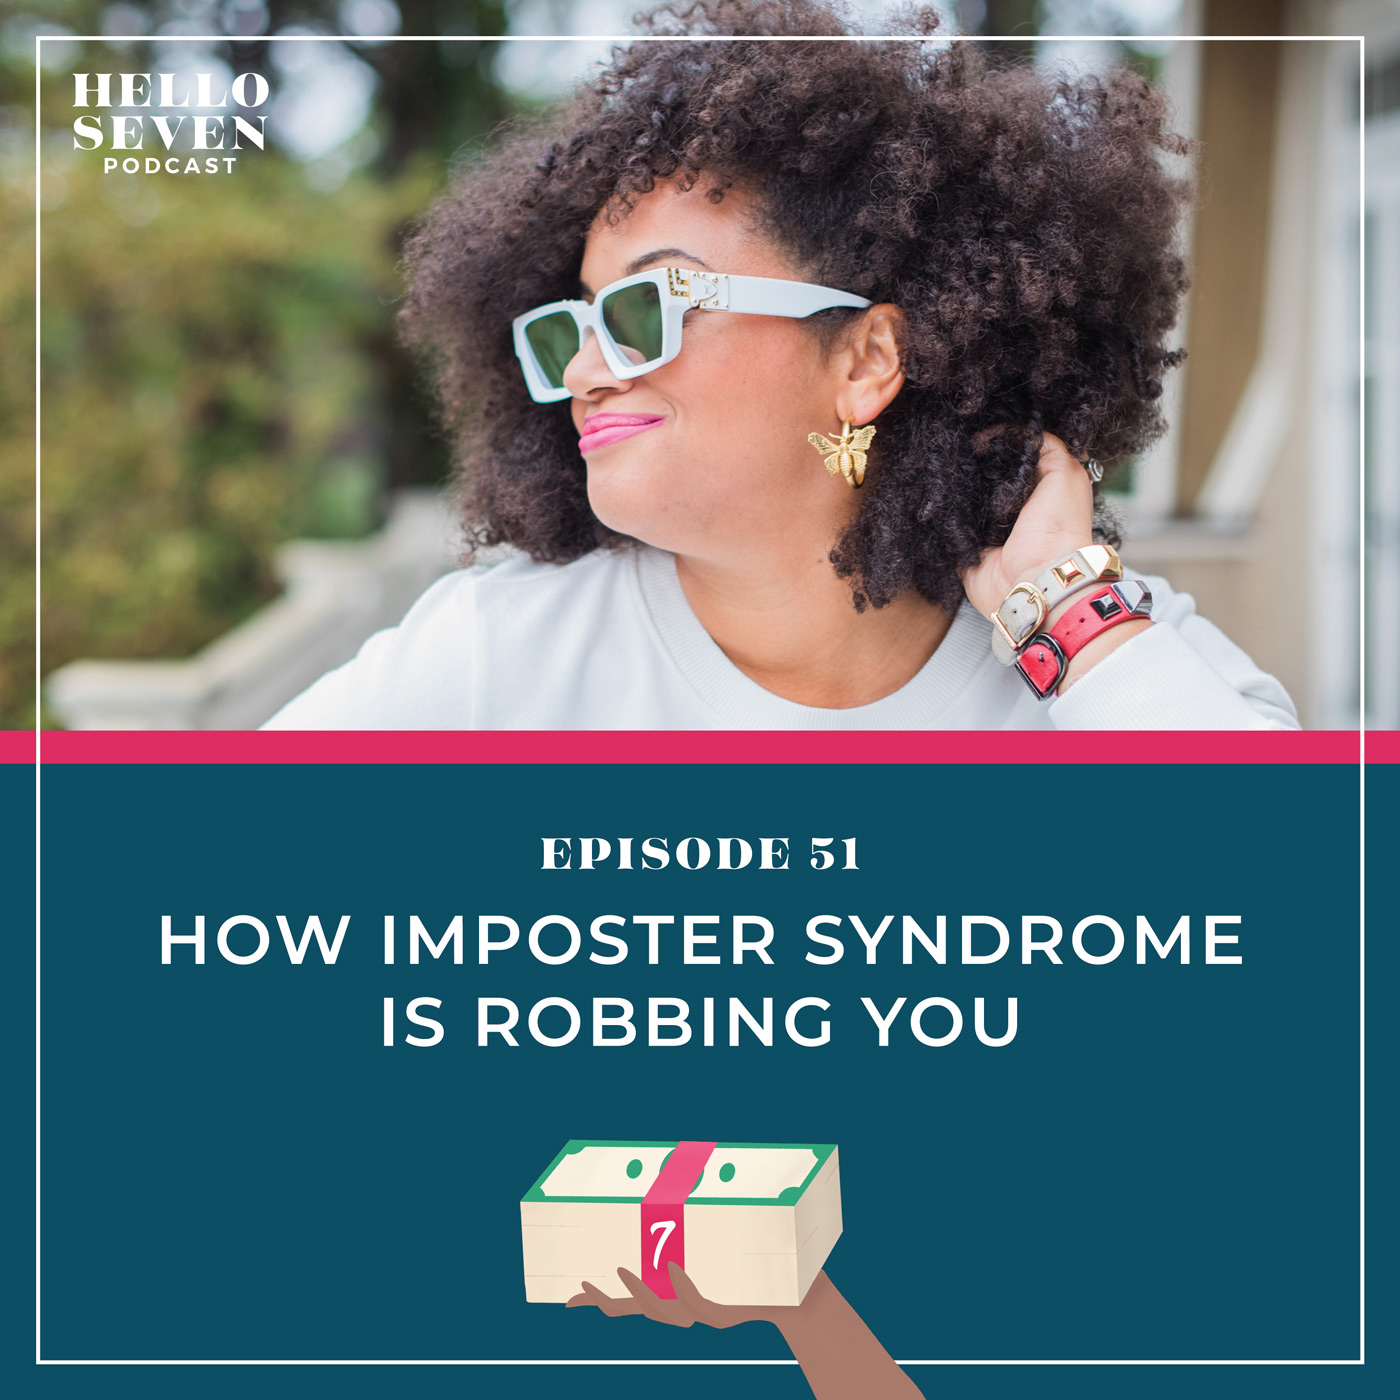 How Imposter Syndrome Is Robbing You